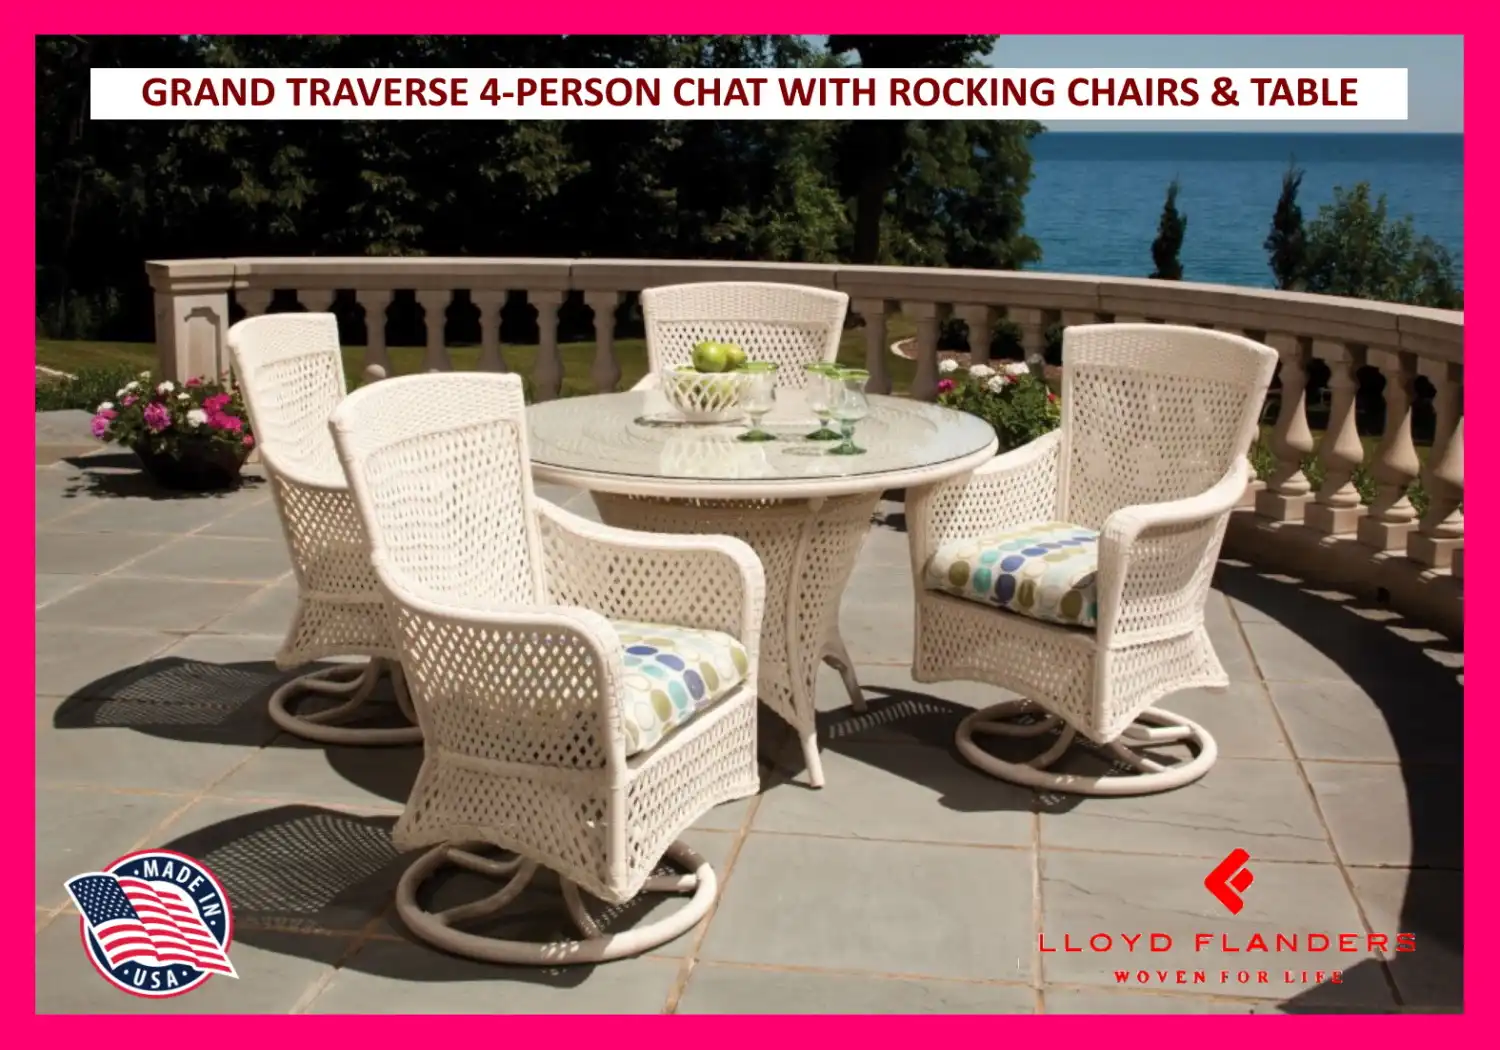 GRAND TRAVERSE 4-PERSON CHAT WITH ROCKING CHAIRS & TABLE